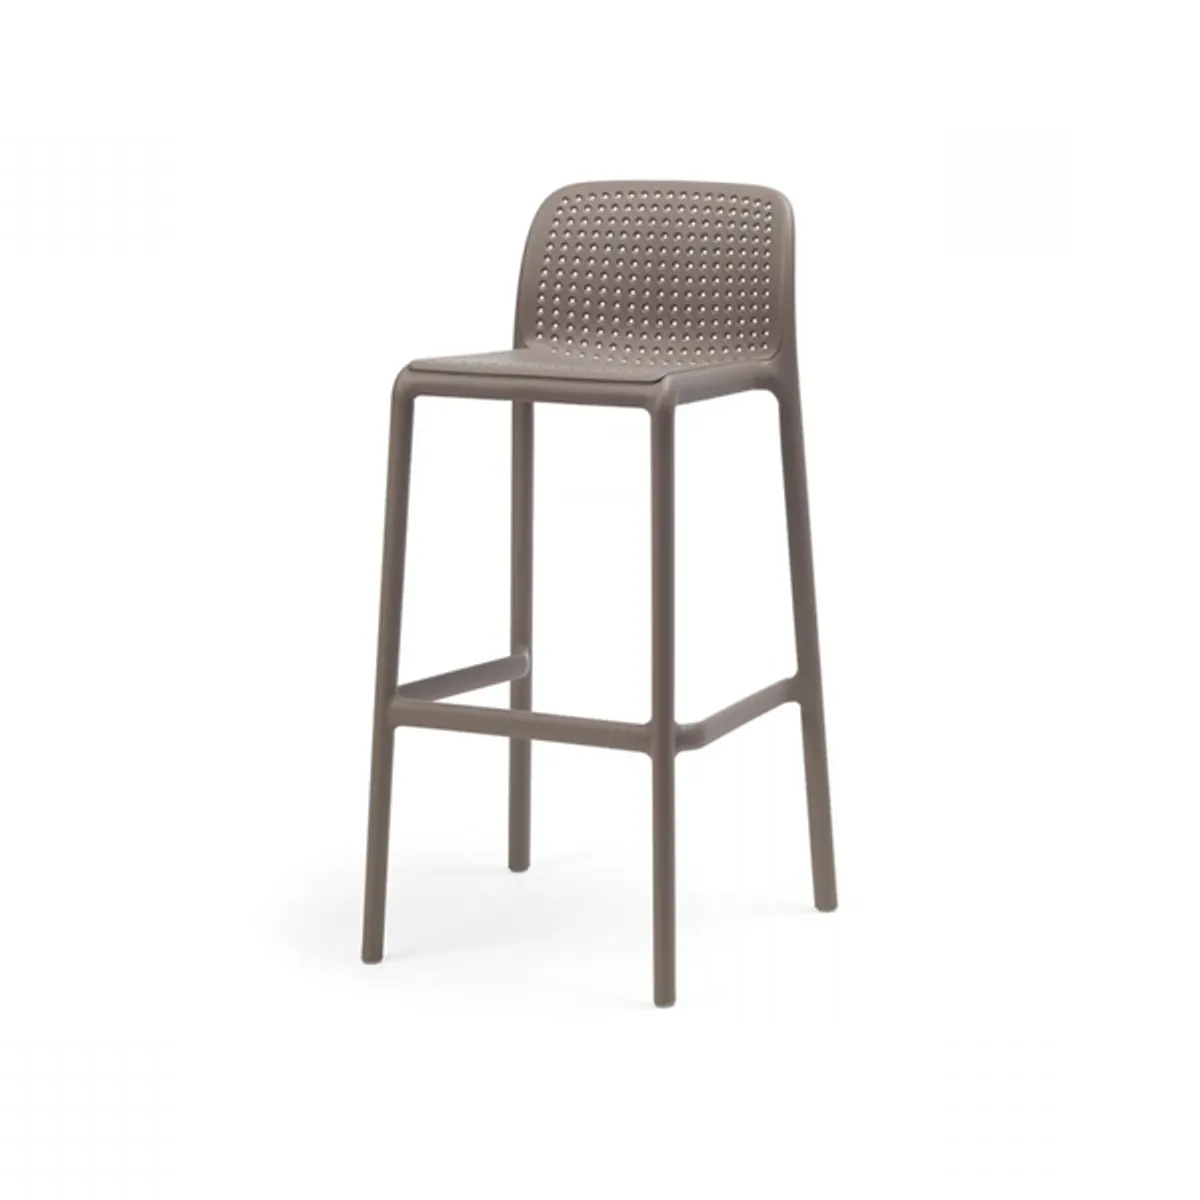 Lido bar stool Inside Out Contracts5